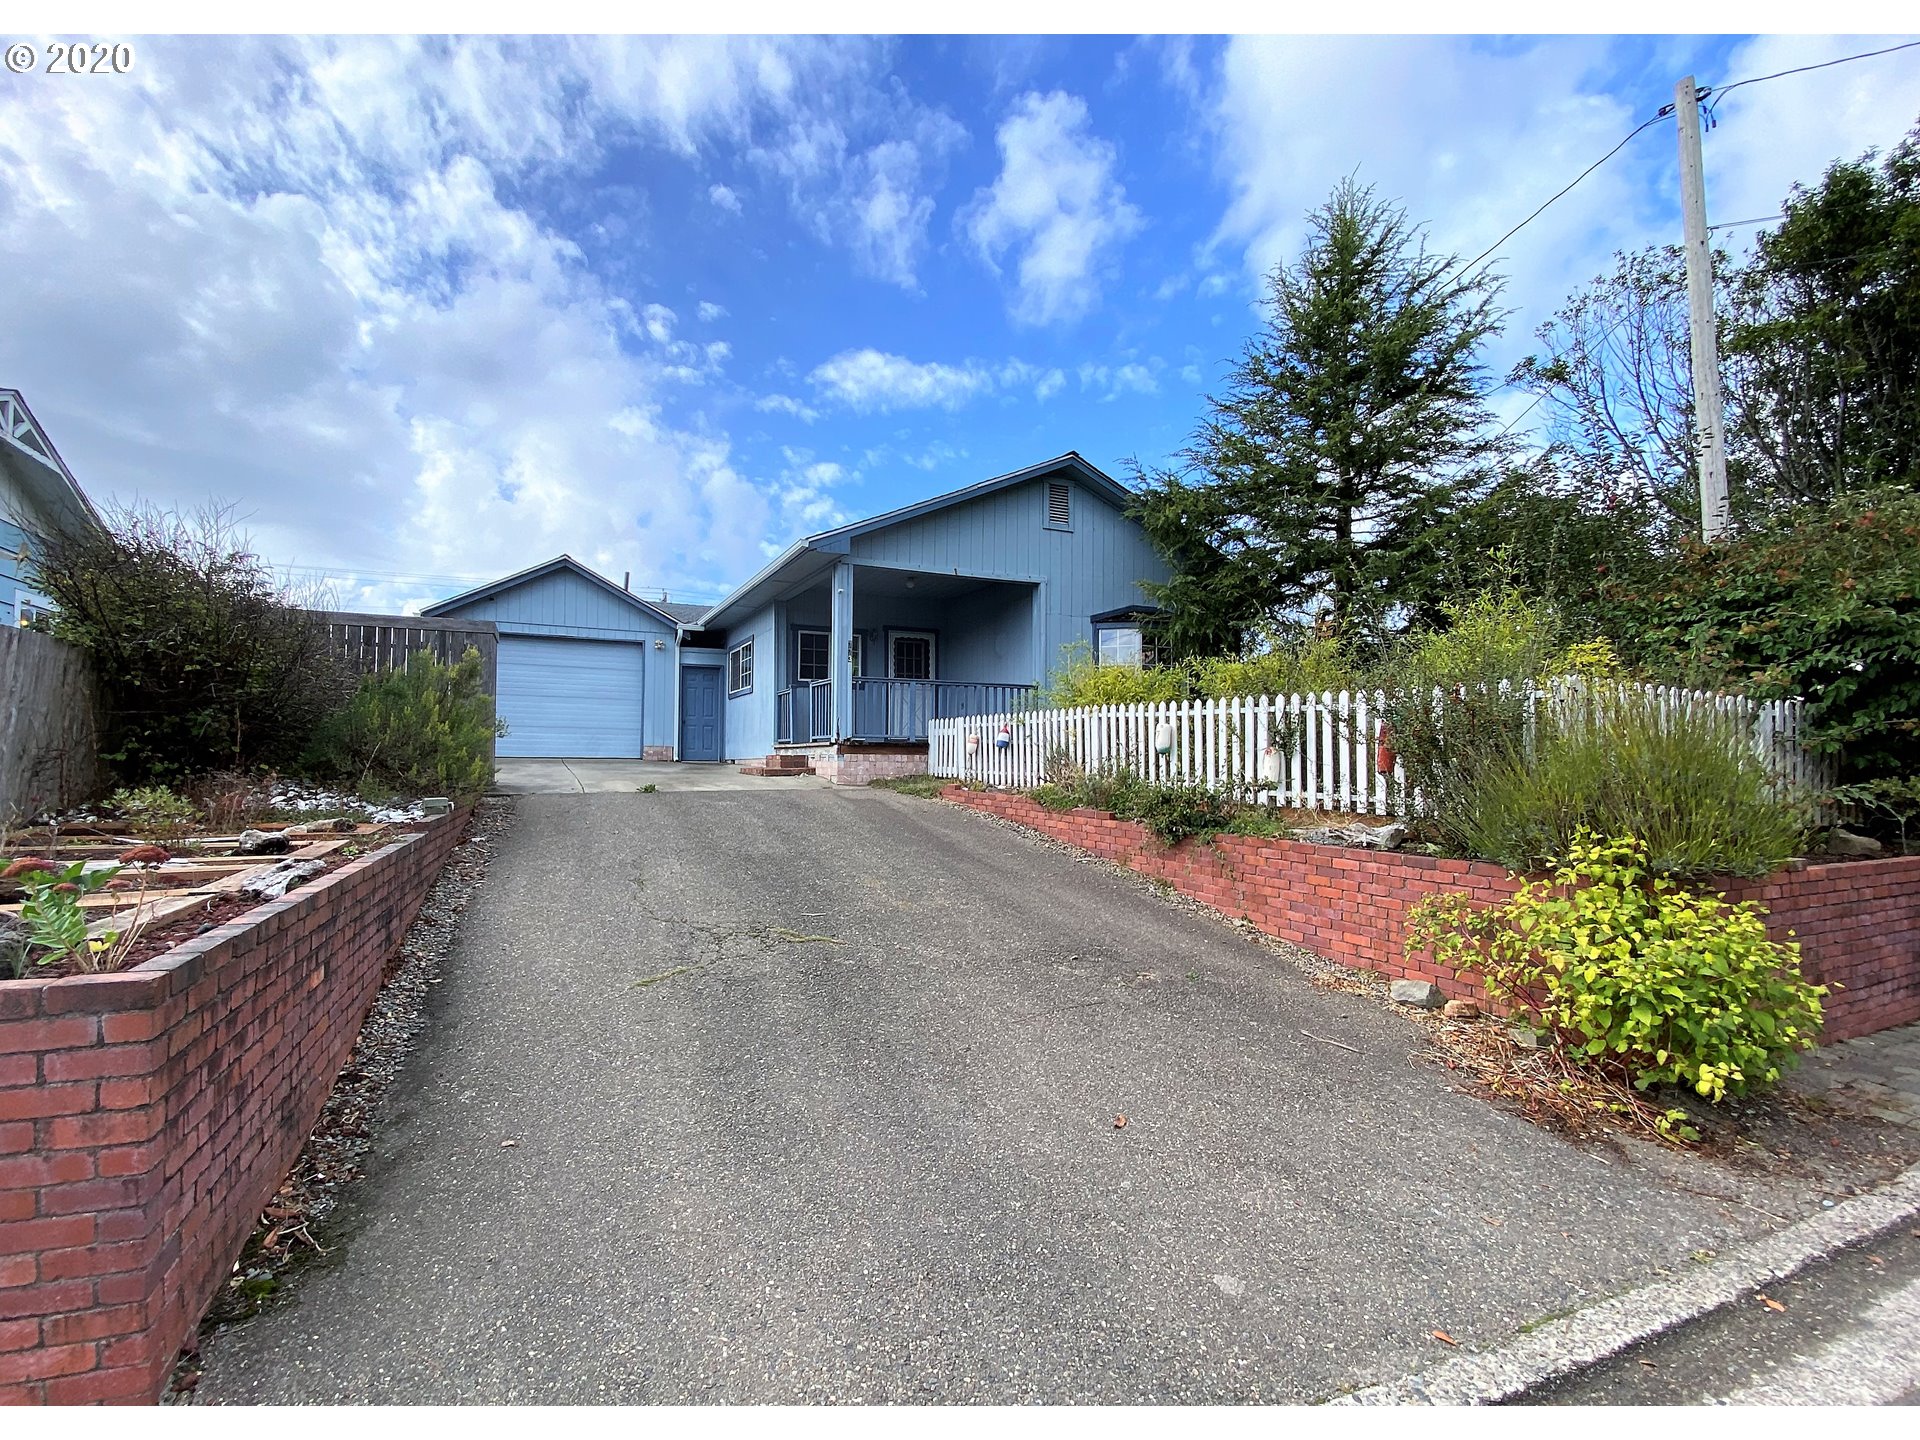 773 CLEARLAKE AVE (1 of 28)